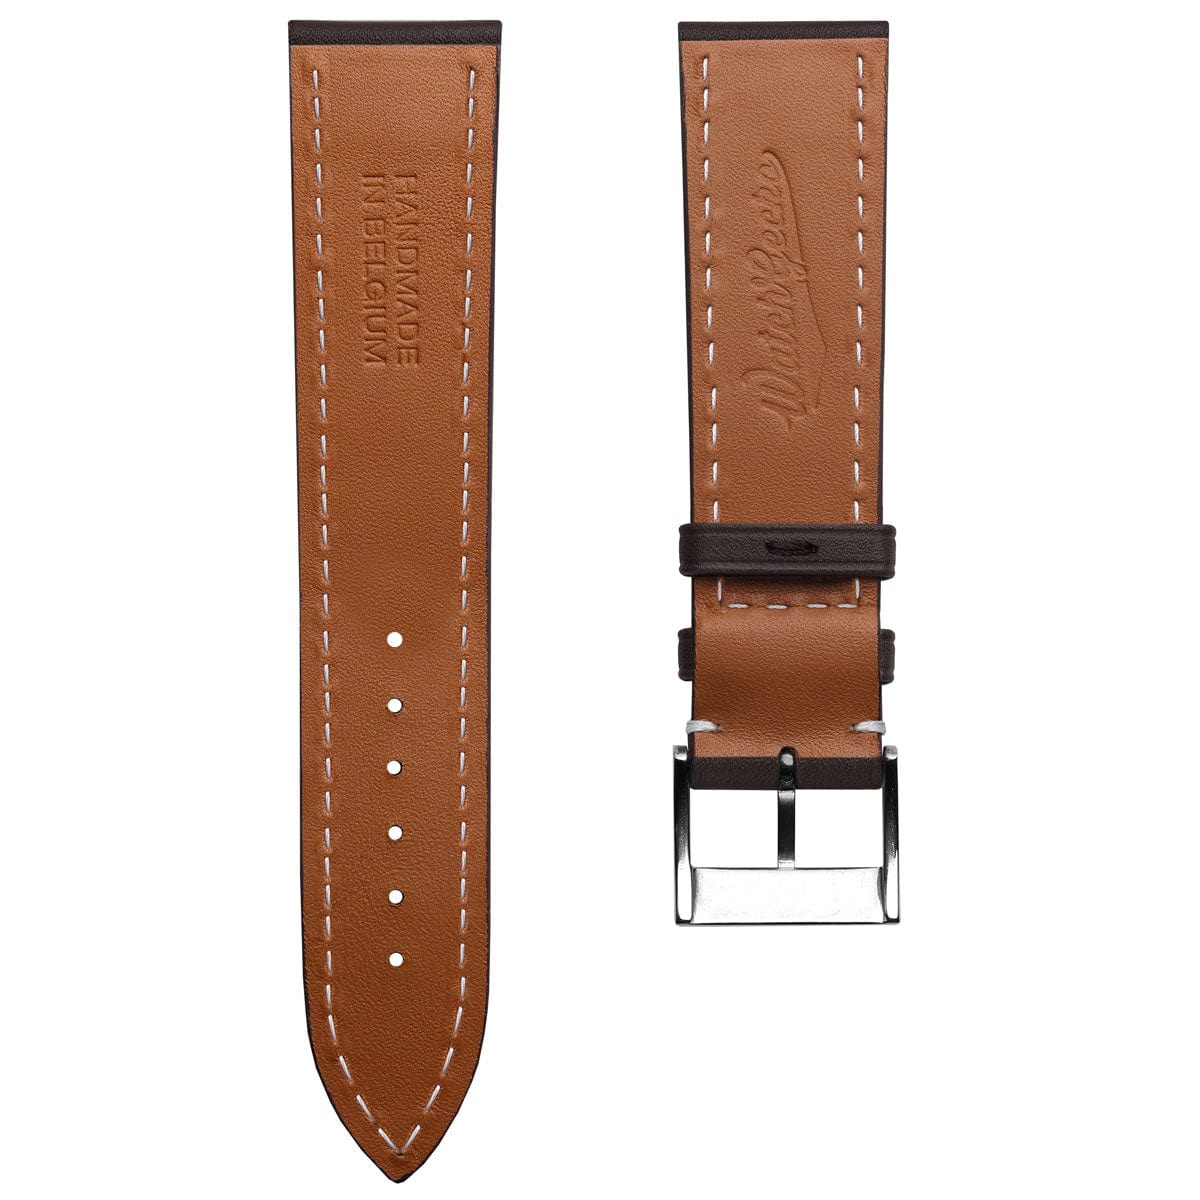 Ostend Thick Padded Leather Watch Strap - Baranil Chocolate Brown